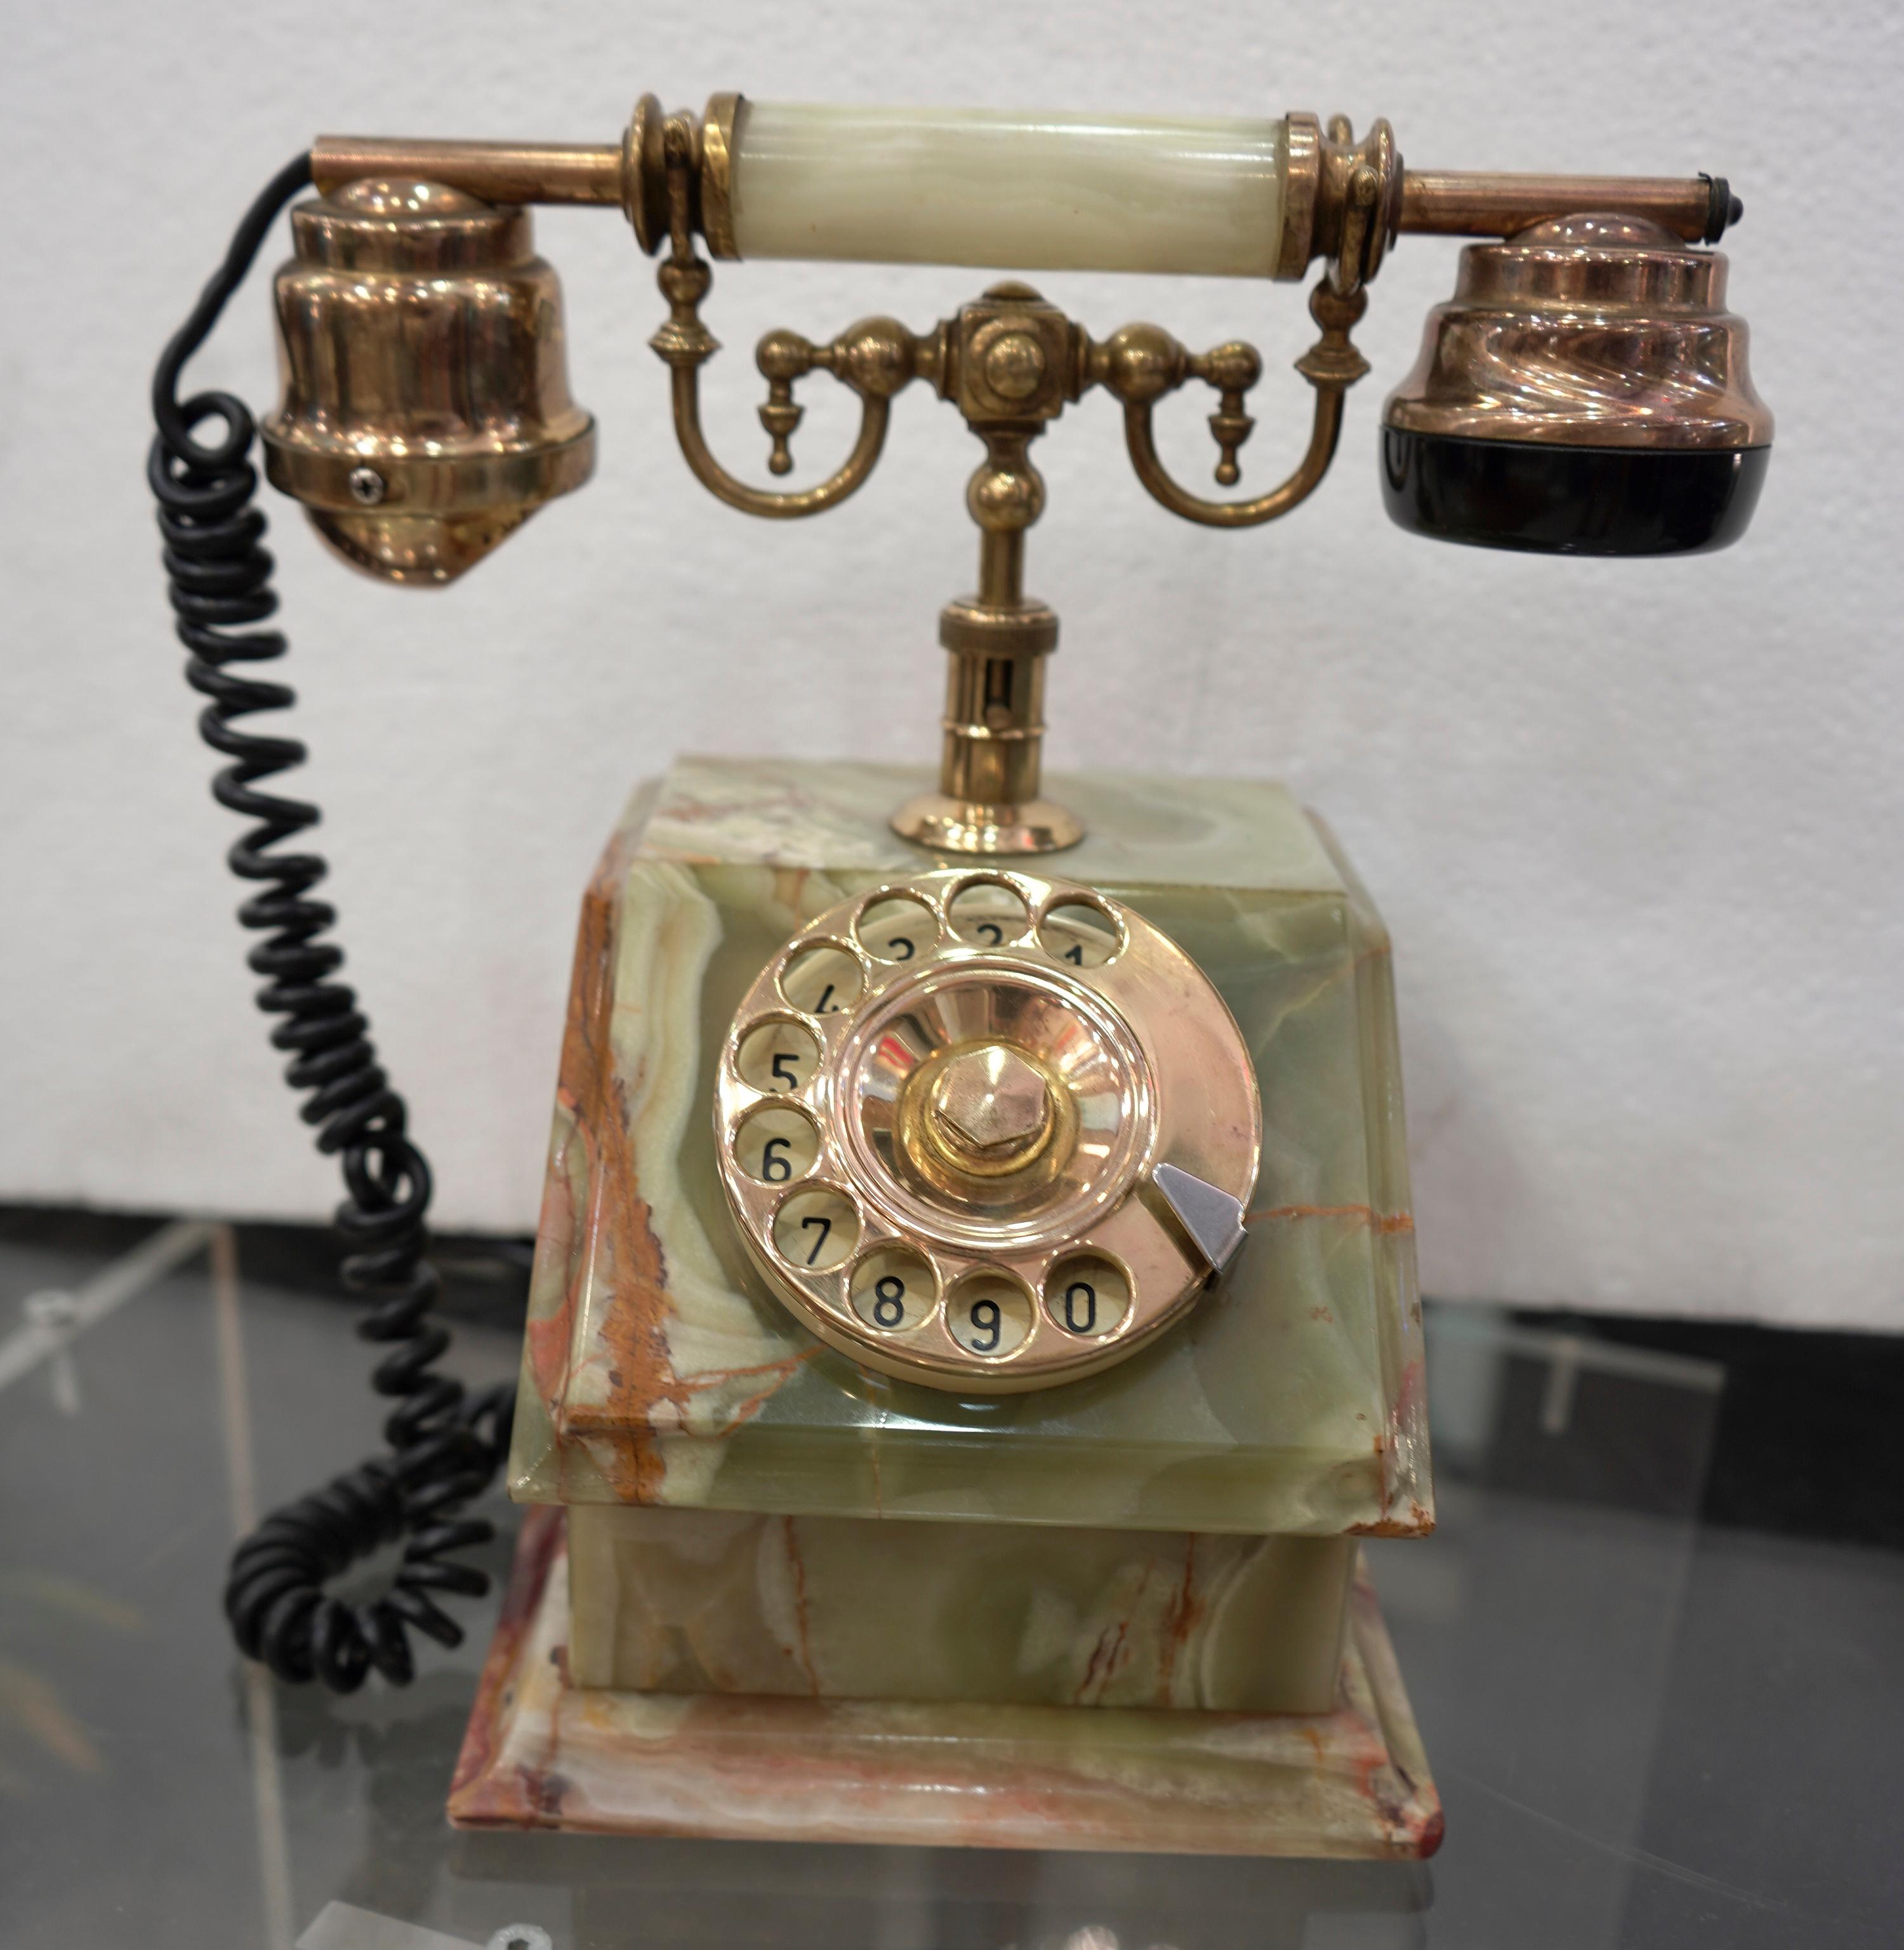 Amazing Italian marble green onix and gilded bronze phone, is an extraordinary collection piece !!!, in a very good condition, it can be used now.
Its a piece very sought after and it gives a touch of glamour in any room!